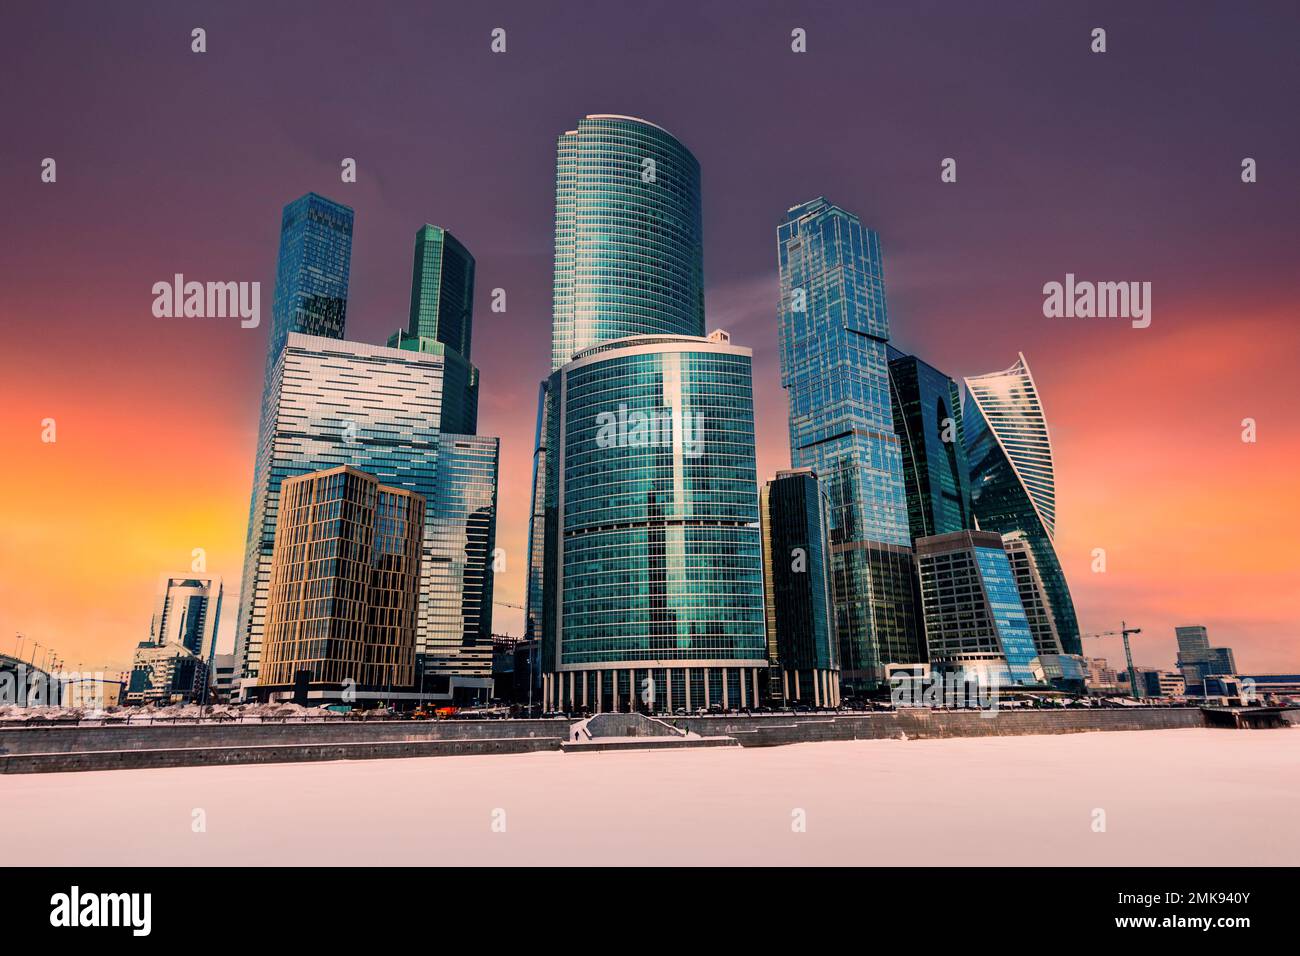 Moscow city (Moscow International Business Center), Russia Stock Photo